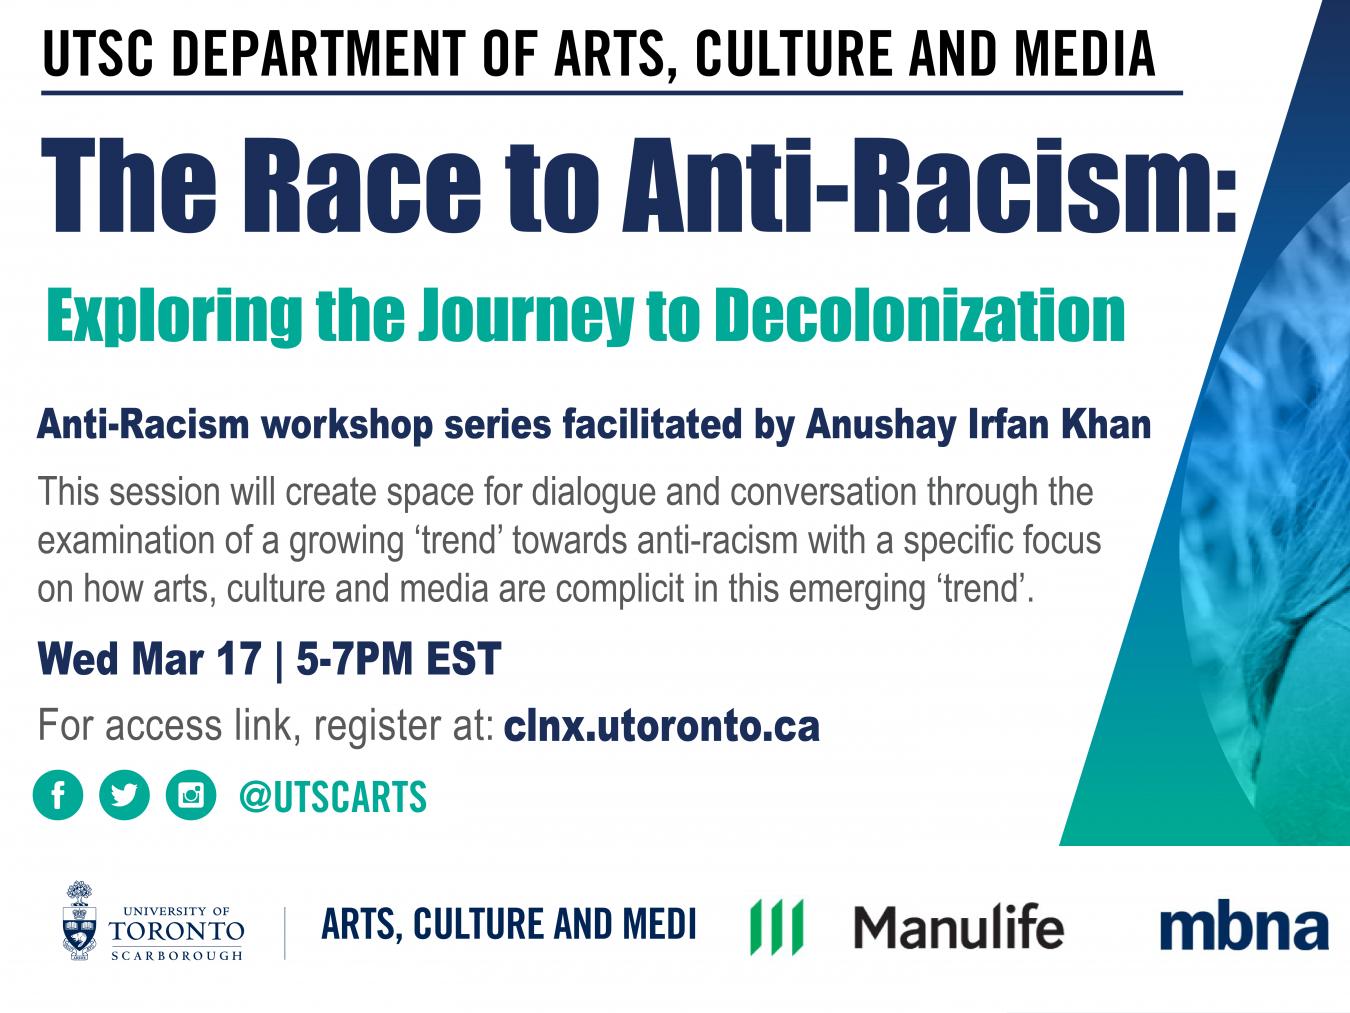 The Race to Anti-Racism: Exploring the Journey to Decolonization